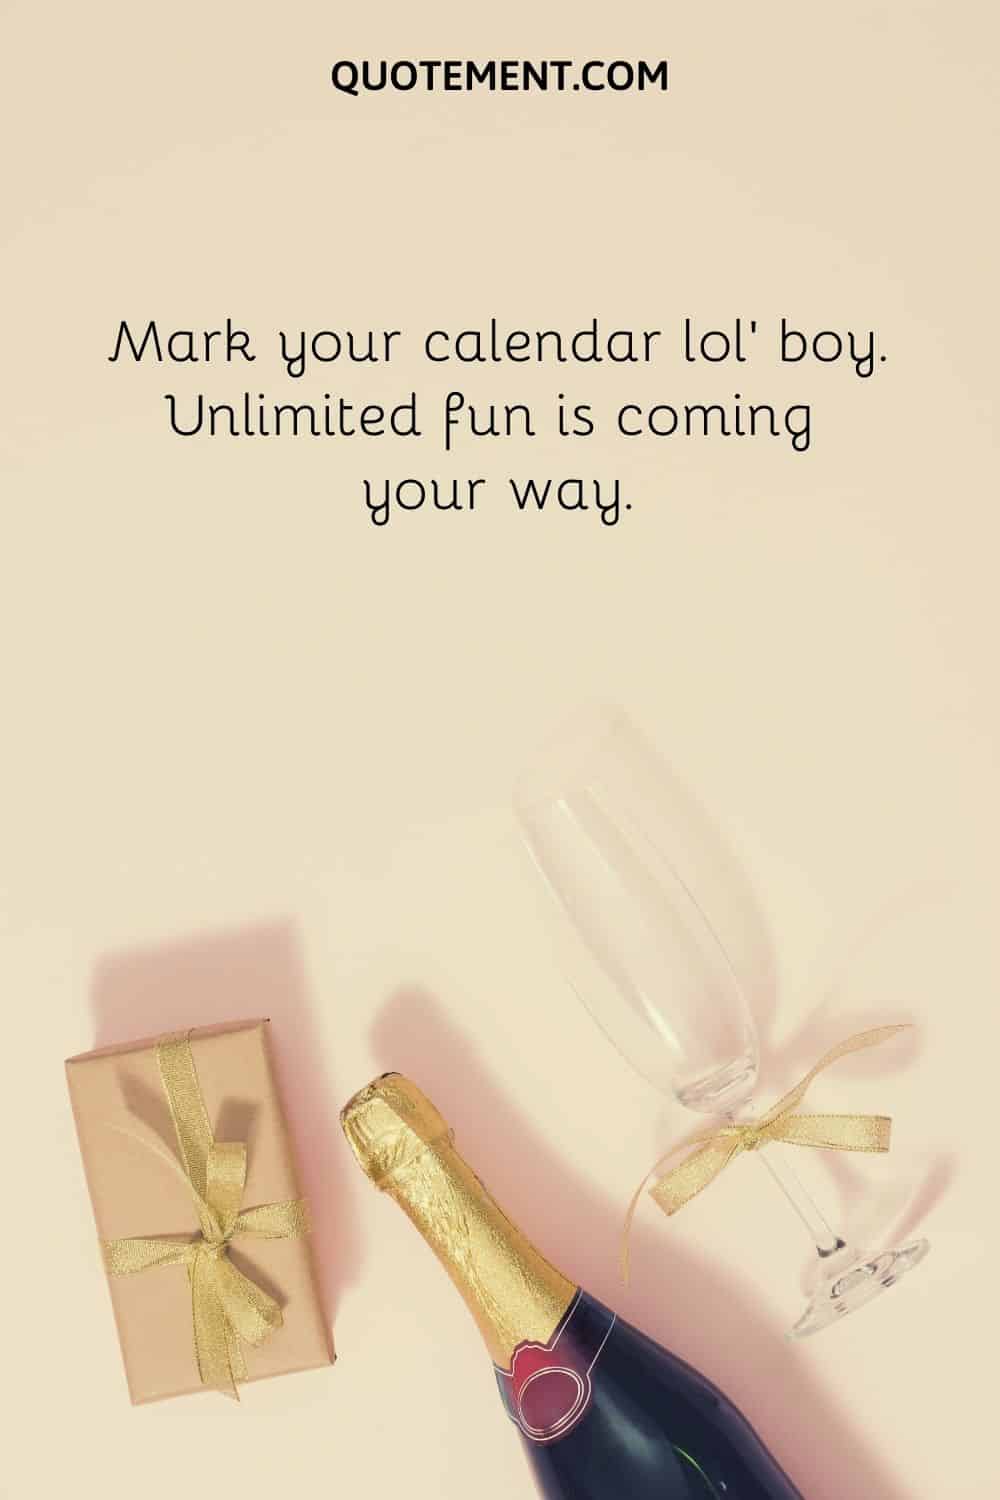 Mark your calendar lol' boy. Unlimited fun is coming your way